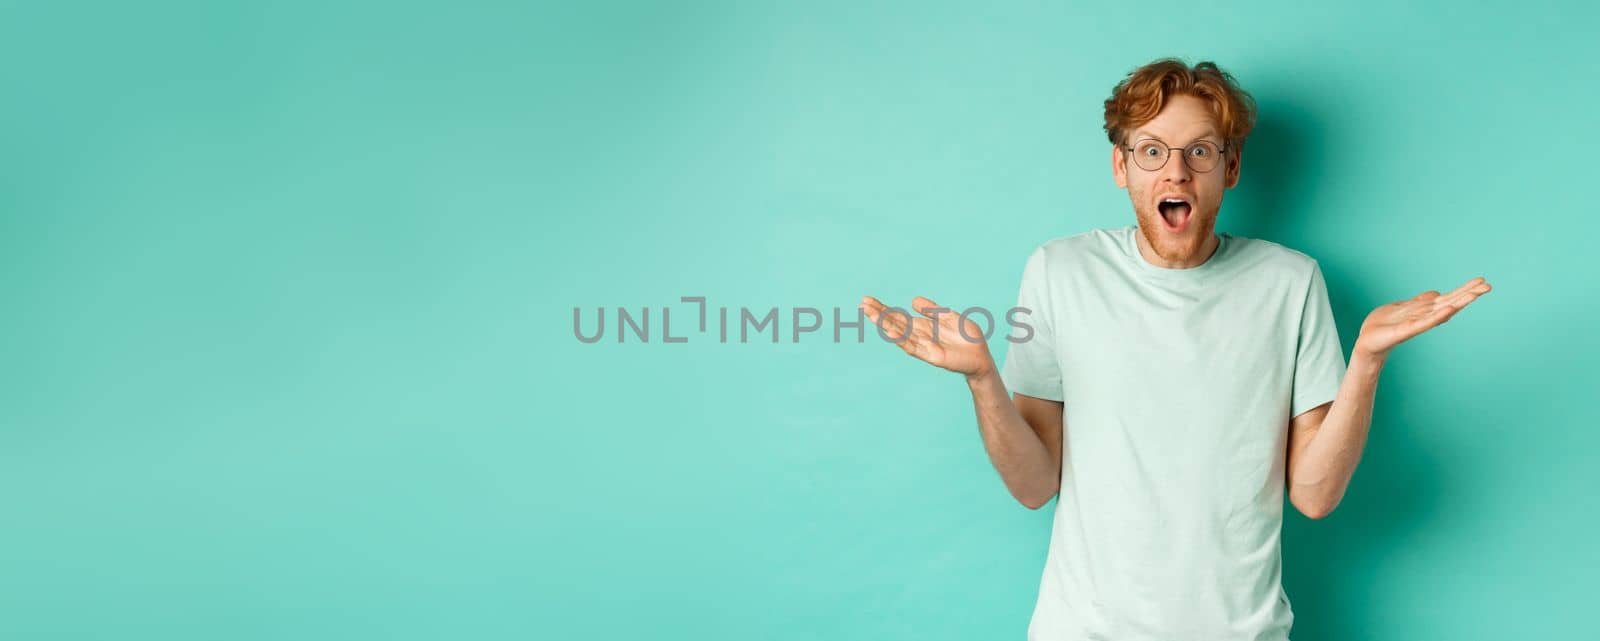 Surprised handsome man with red hair, wearing glasses, spread hands sideways and gasping in awe, looking wondered at camera, standing over turquoise background.